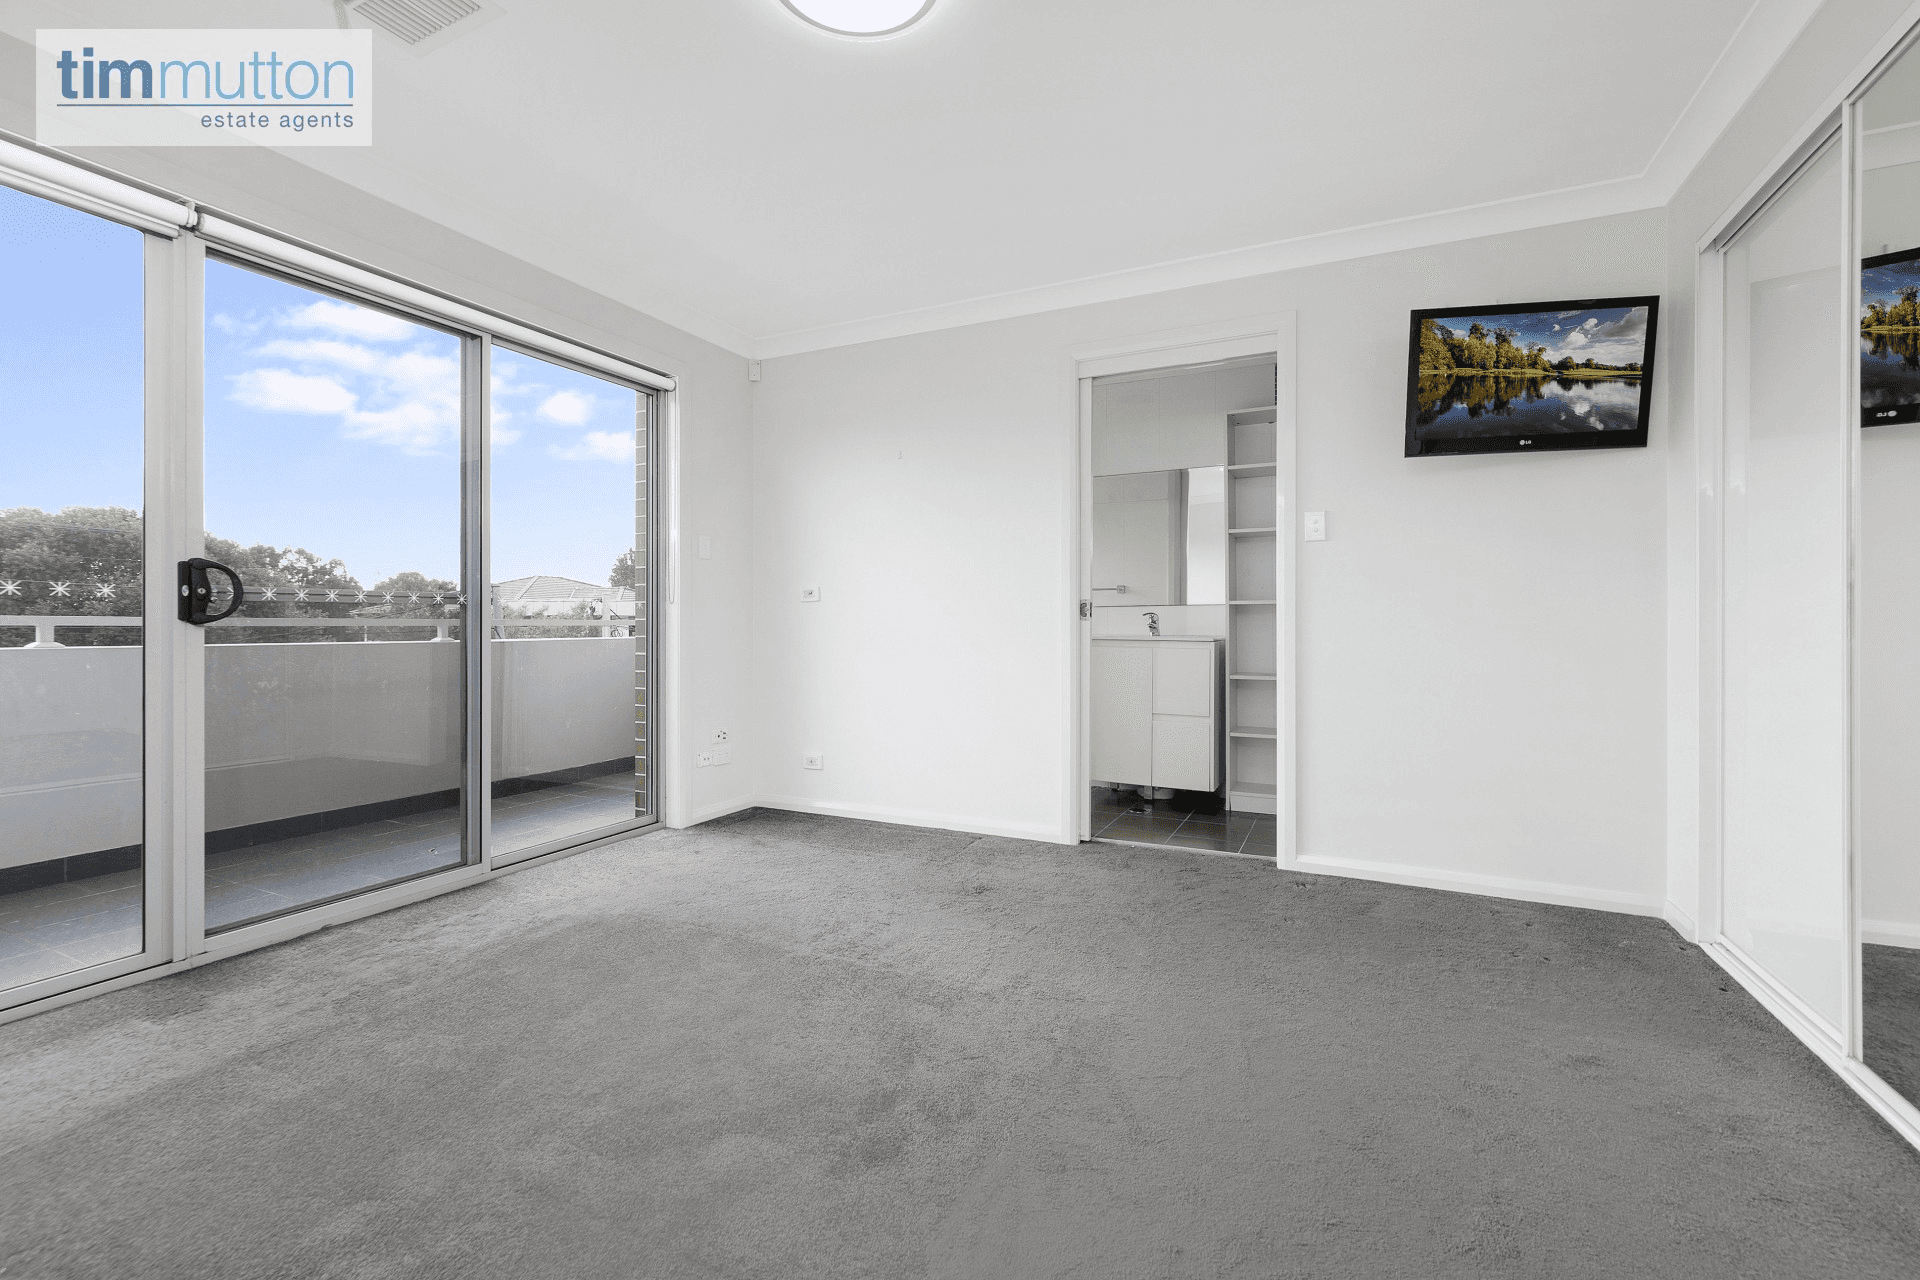 55 Tracey St, Revesby, NSW 2212